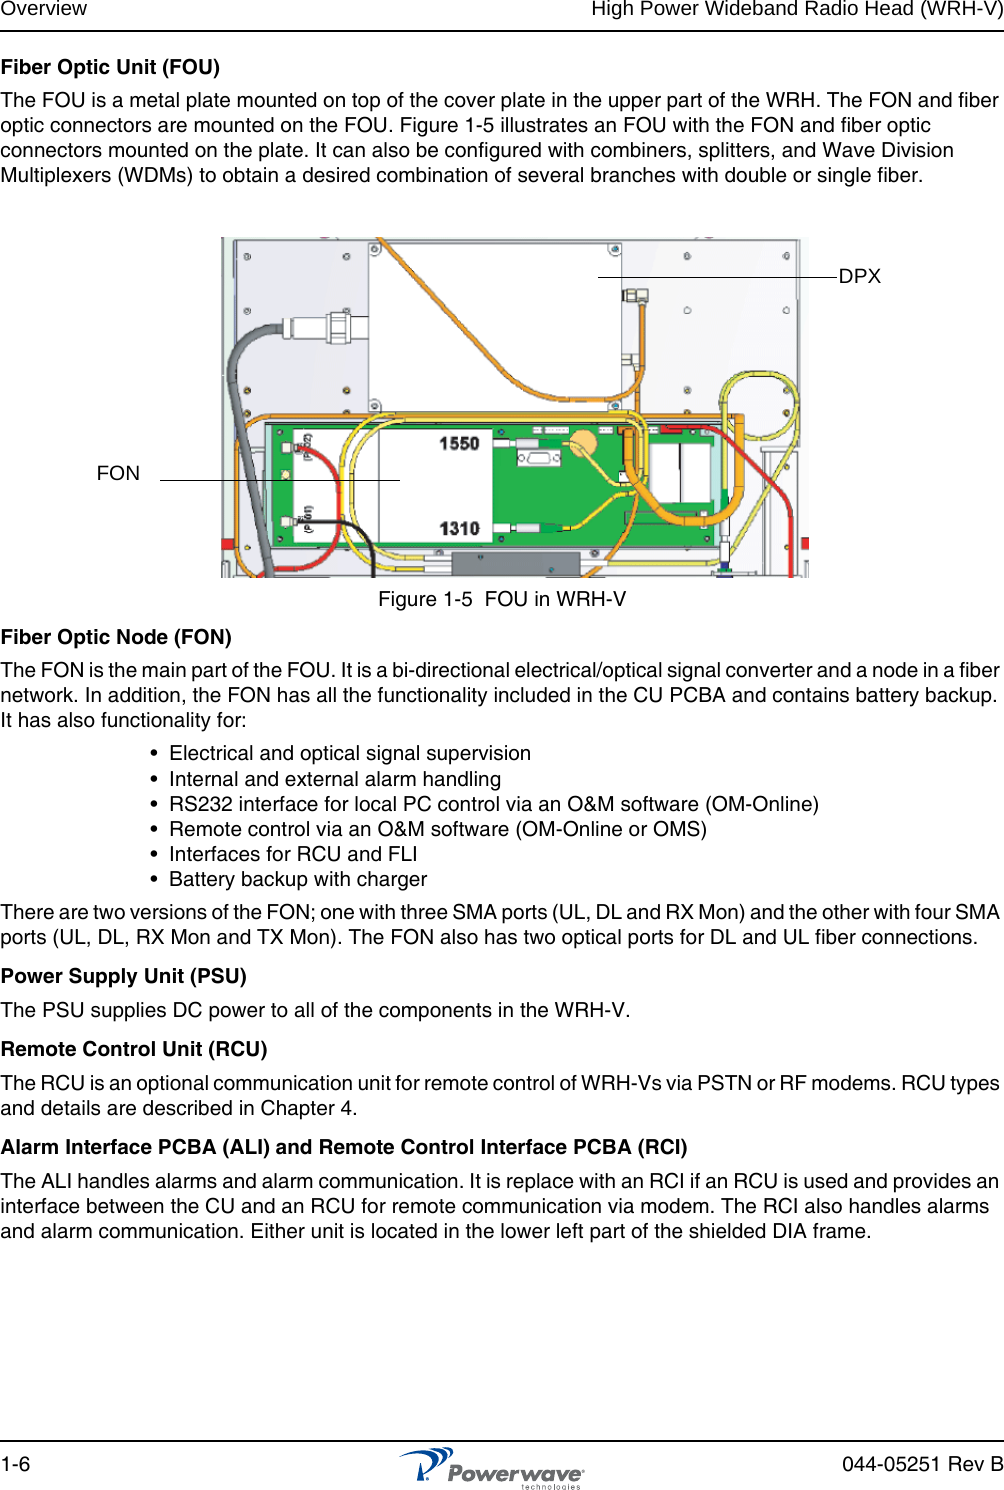 Overview High Power Wideband Radio Head (WRH-V)1-6 044-05251 Rev BFiber Optic Unit (FOU)The FOU is a metal plate mounted on top of the cover plate in the upper part of the WRH. The FON and fiber optic connectors are mounted on the FOU. Figure 1-5 illustrates an FOU with the FON and fiber optic connectors mounted on the plate. It can also be configured with combiners, splitters, and Wave Division Multiplexers (WDMs) to obtain a desired combination of several branches with double or single fiber.Figure 1-5  FOU in WRH-VFiber Optic Node (FON)The FON is the main part of the FOU. It is a bi-directional electrical/optical signal converter and a node in a fiber network. In addition, the FON has all the functionality included in the CU PCBA and contains battery backup. It has also functionality for:•  Electrical and optical signal supervision•  Internal and external alarm handling•  RS232 interface for local PC control via an O&amp;M software (OM-Online)•  Remote control via an O&amp;M software (OM-Online or OMS)•  Interfaces for RCU and FLI•  Battery backup with chargerThere are two versions of the FON; one with three SMA ports (UL, DL and RX Mon) and the other with four SMA ports (UL, DL, RX Mon and TX Mon). The FON also has two optical ports for DL and UL fiber connections.Power Supply Unit (PSU)The PSU supplies DC power to all of the components in the WRH-V.Remote Control Unit (RCU)The RCU is an optional communication unit for remote control of WRH-Vs via PSTN or RF modems. RCU types and details are described in Chapter 4.Alarm Interface PCBA (ALI) and Remote Control Interface PCBA (RCI)The ALI handles alarms and alarm communication. It is replace with an RCI if an RCU is used and provides an interface between the CU and an RCU for remote communication via modem. The RCI also handles alarms and alarm communication. Either unit is located in the lower left part of the shielded DIA frame.FONDPX